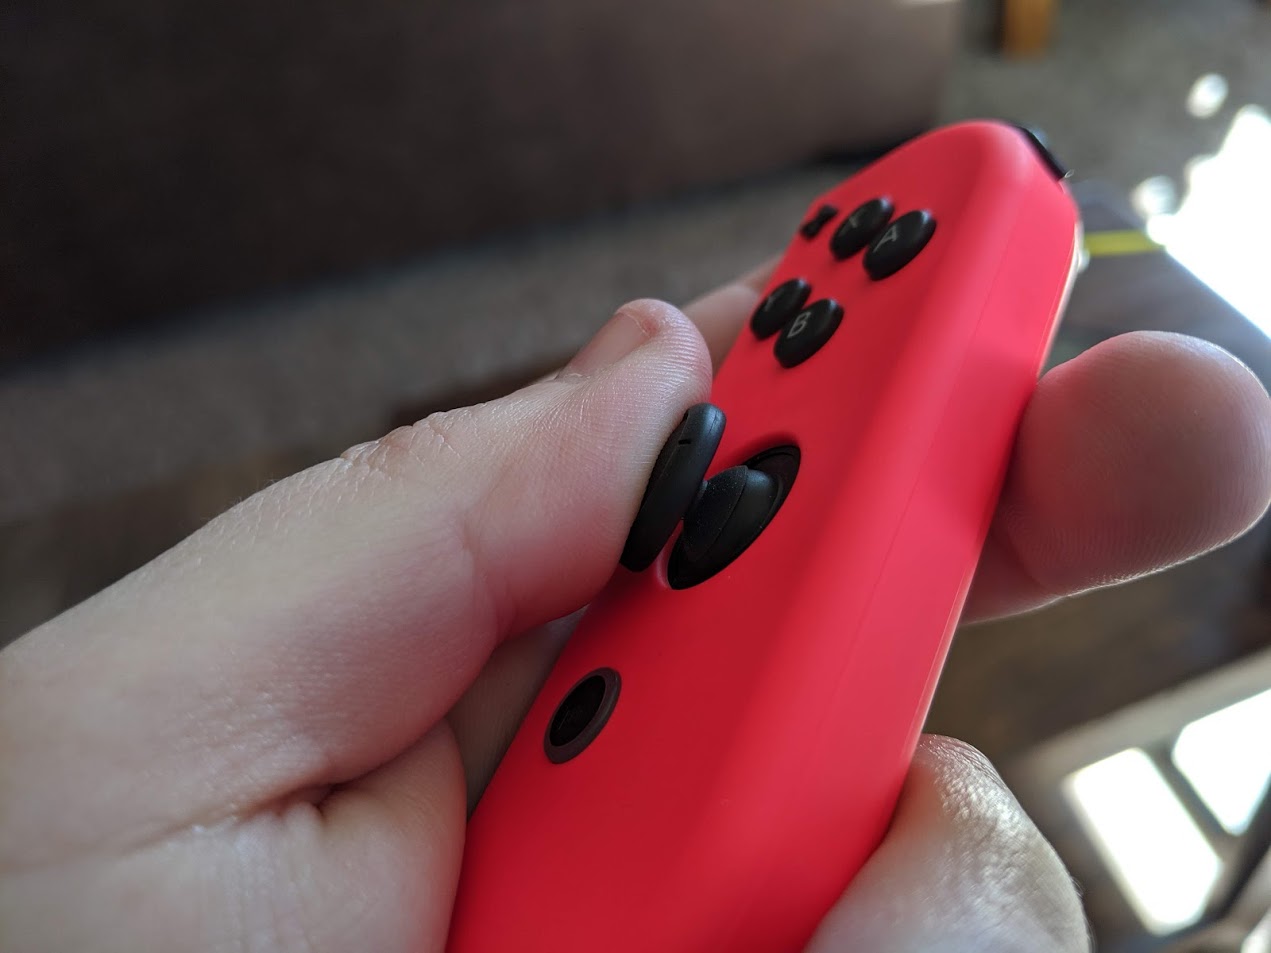 How To Fix Joy-Con Drift On Nintendo Switch And Switch Lite